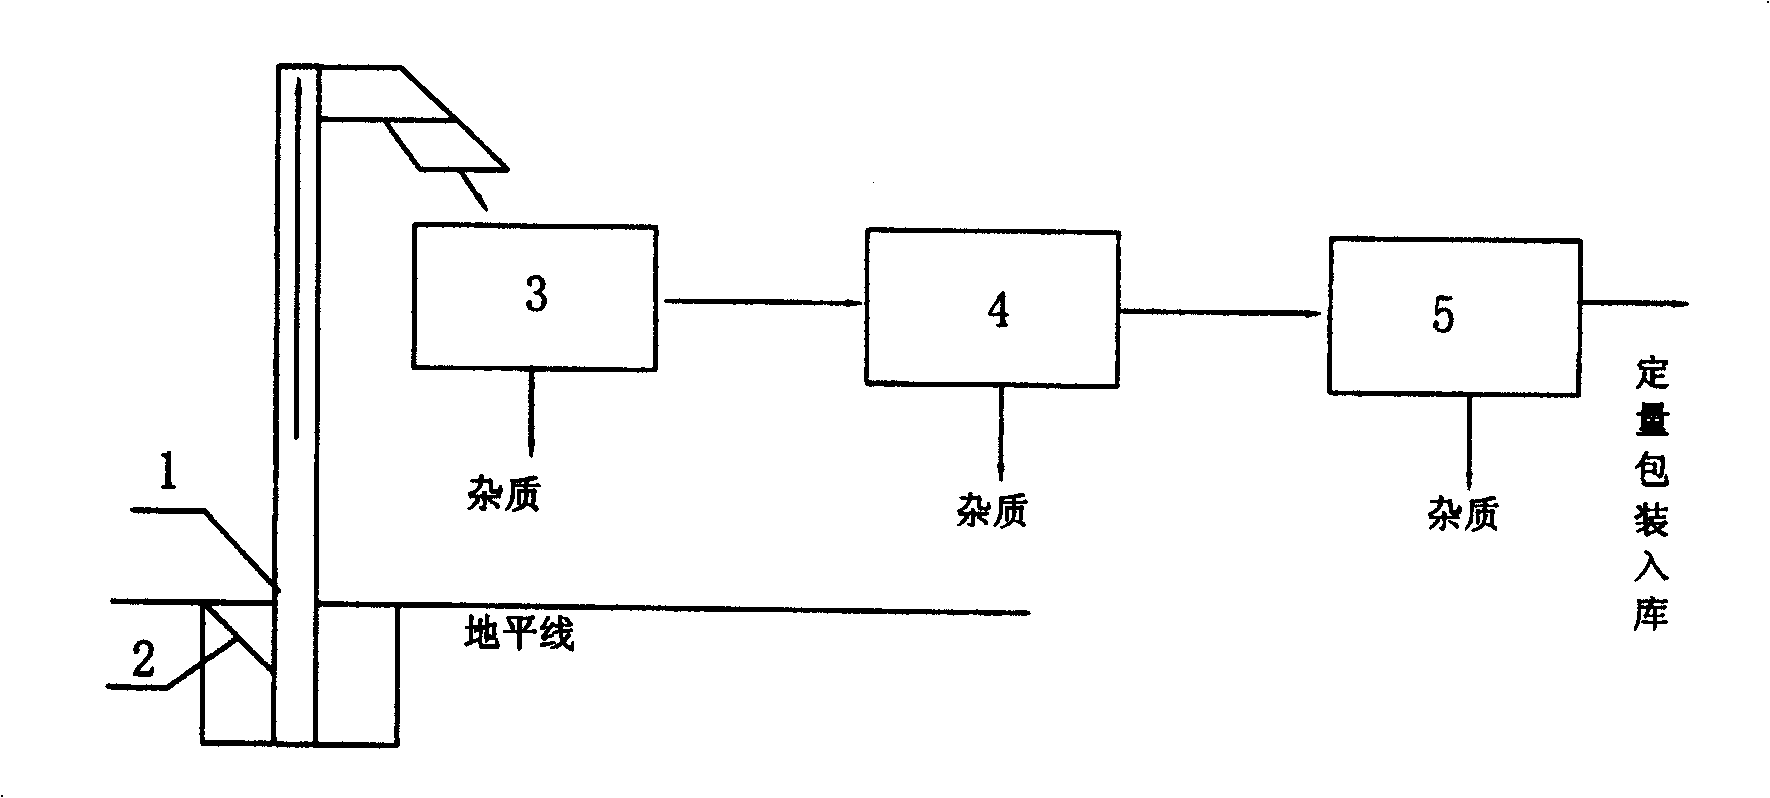 Water-saving environment friendly industrialized treatment system and method for cleaning beans